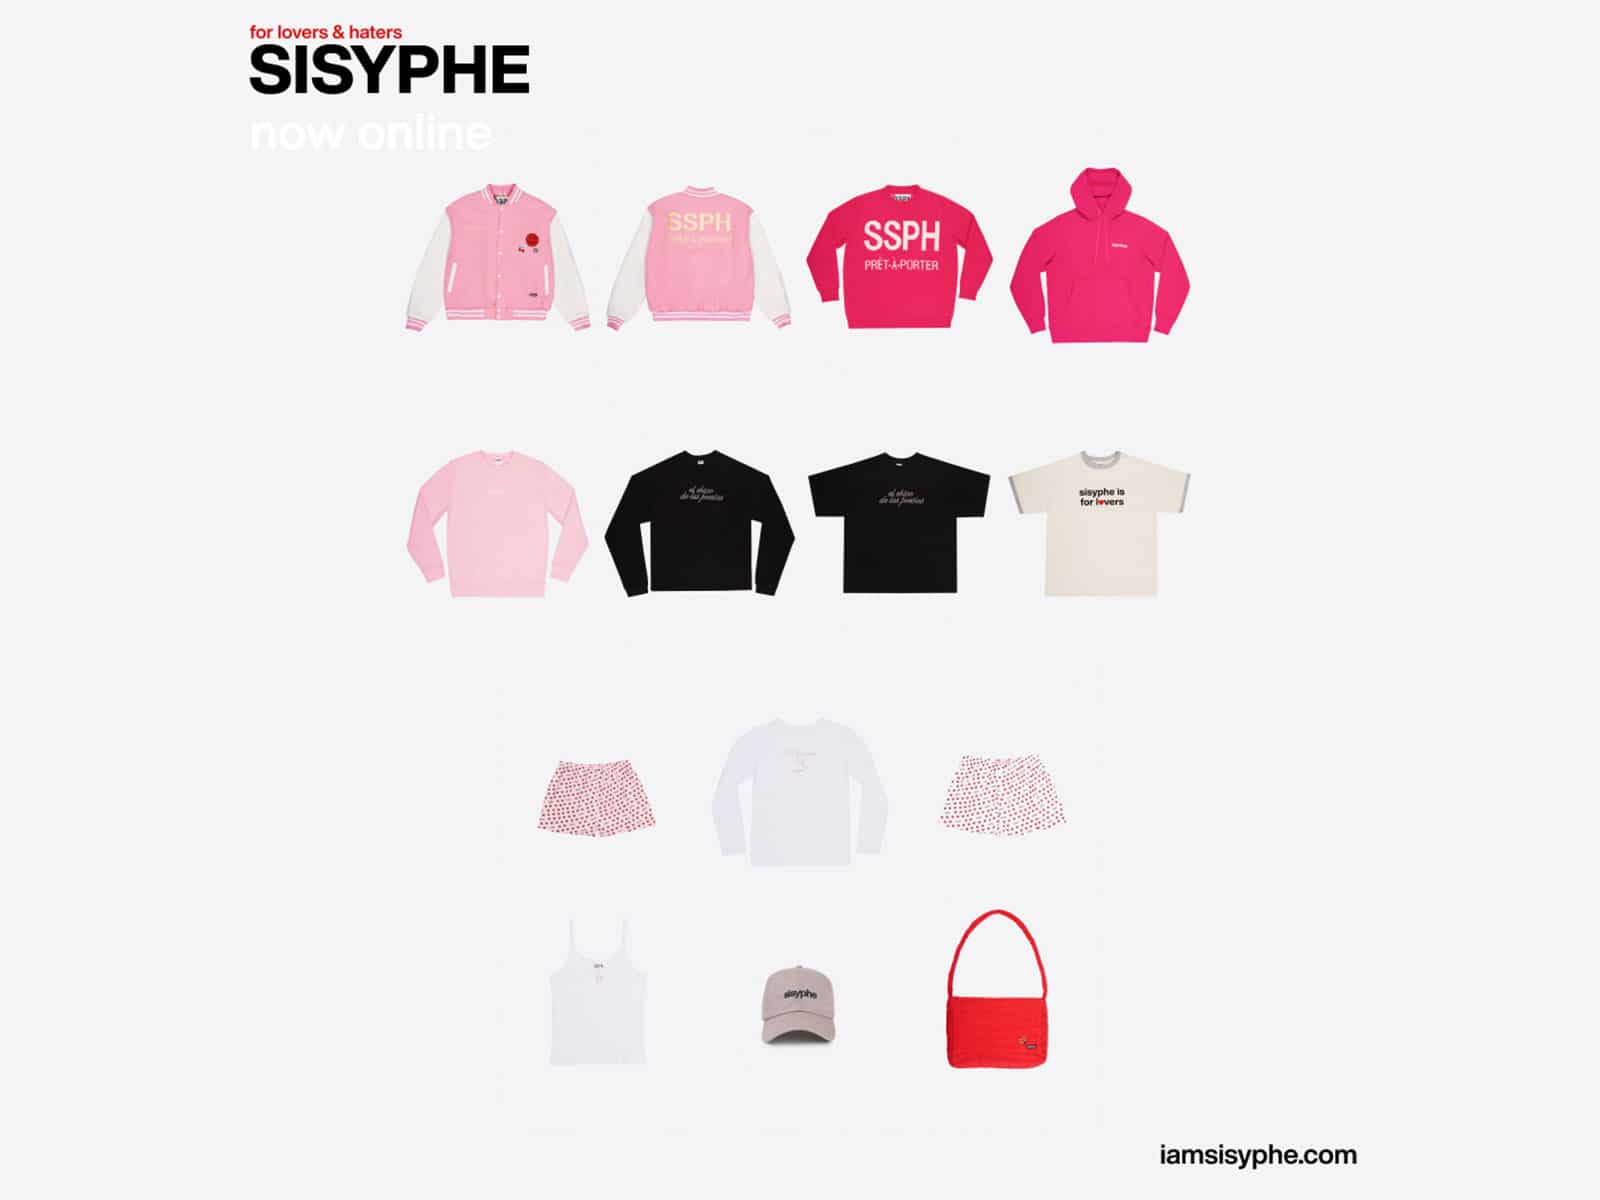 Sisyphe has something for everyone “for lovers & haters”